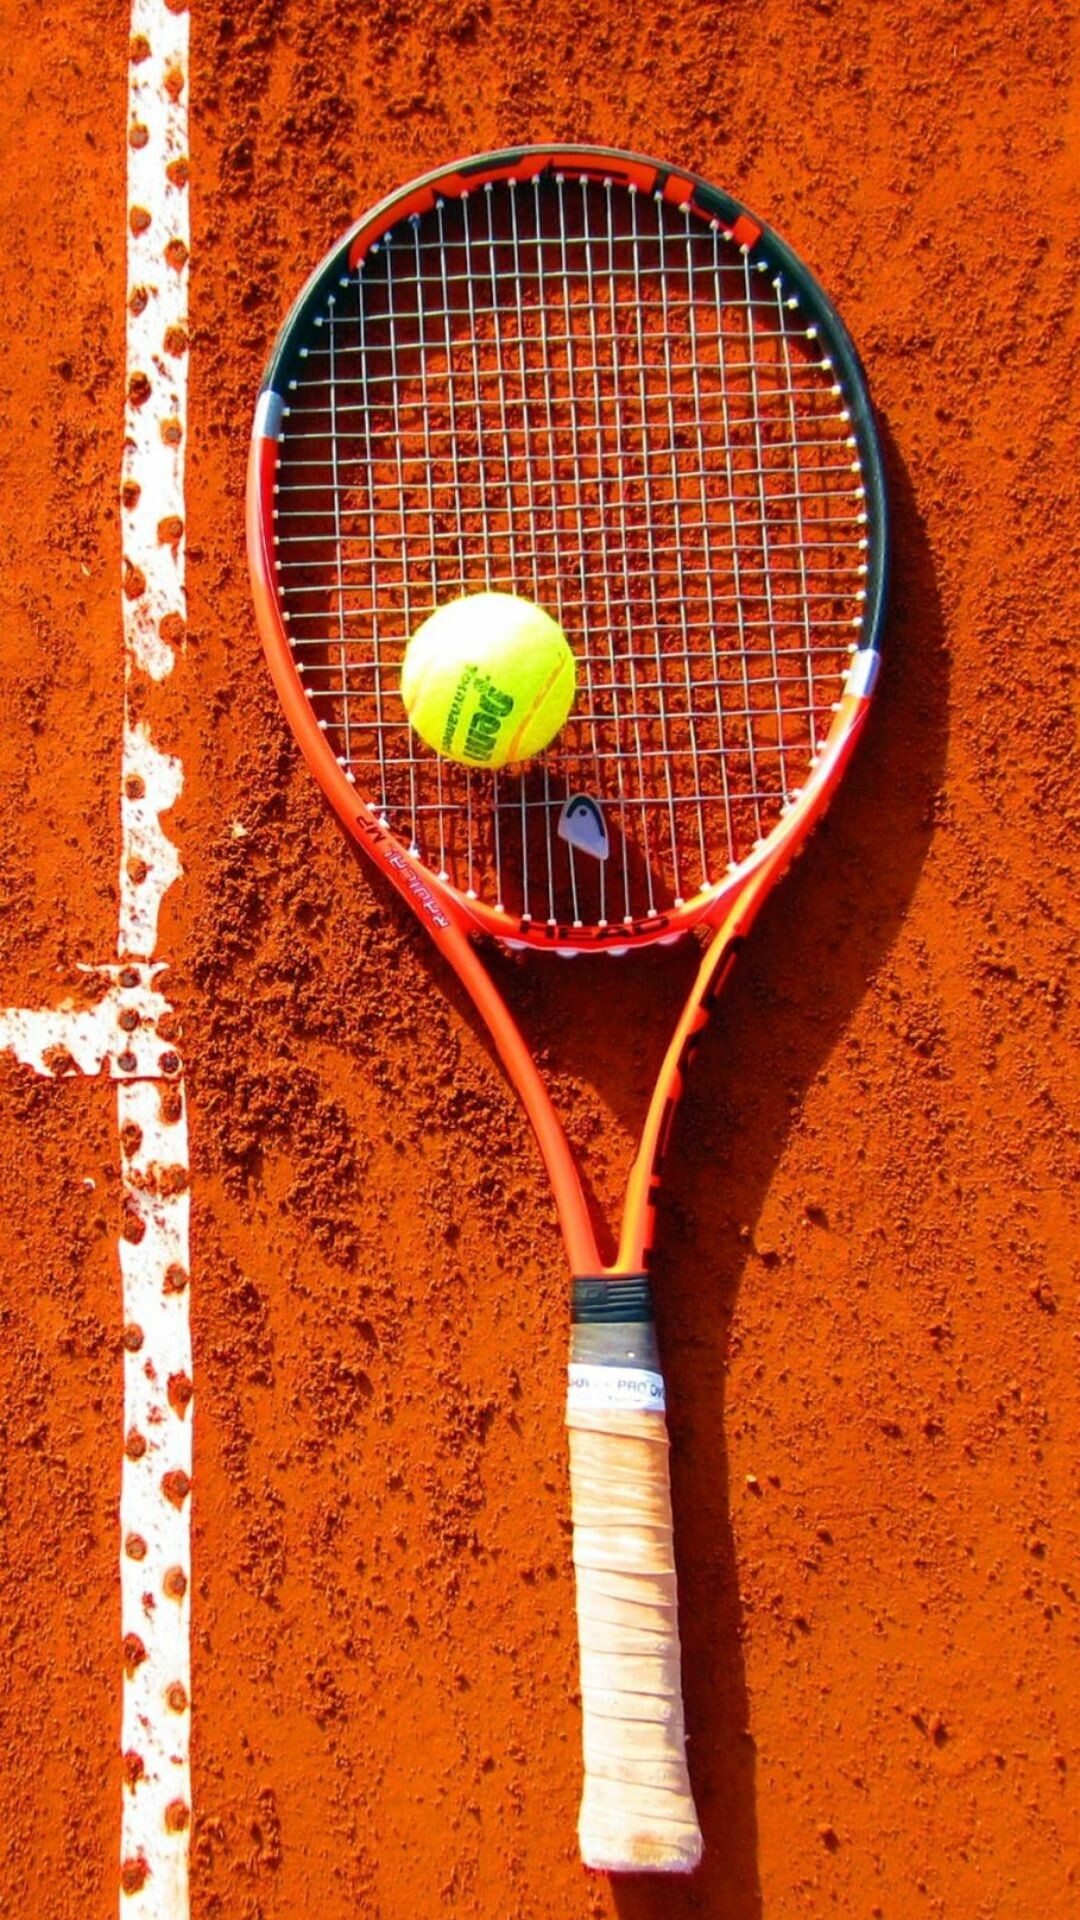 Tennis wallpapers, Best tennis backgrounds, Wallpaper gallery, Tennis enthusiasts, 1080x1920 Full HD Phone